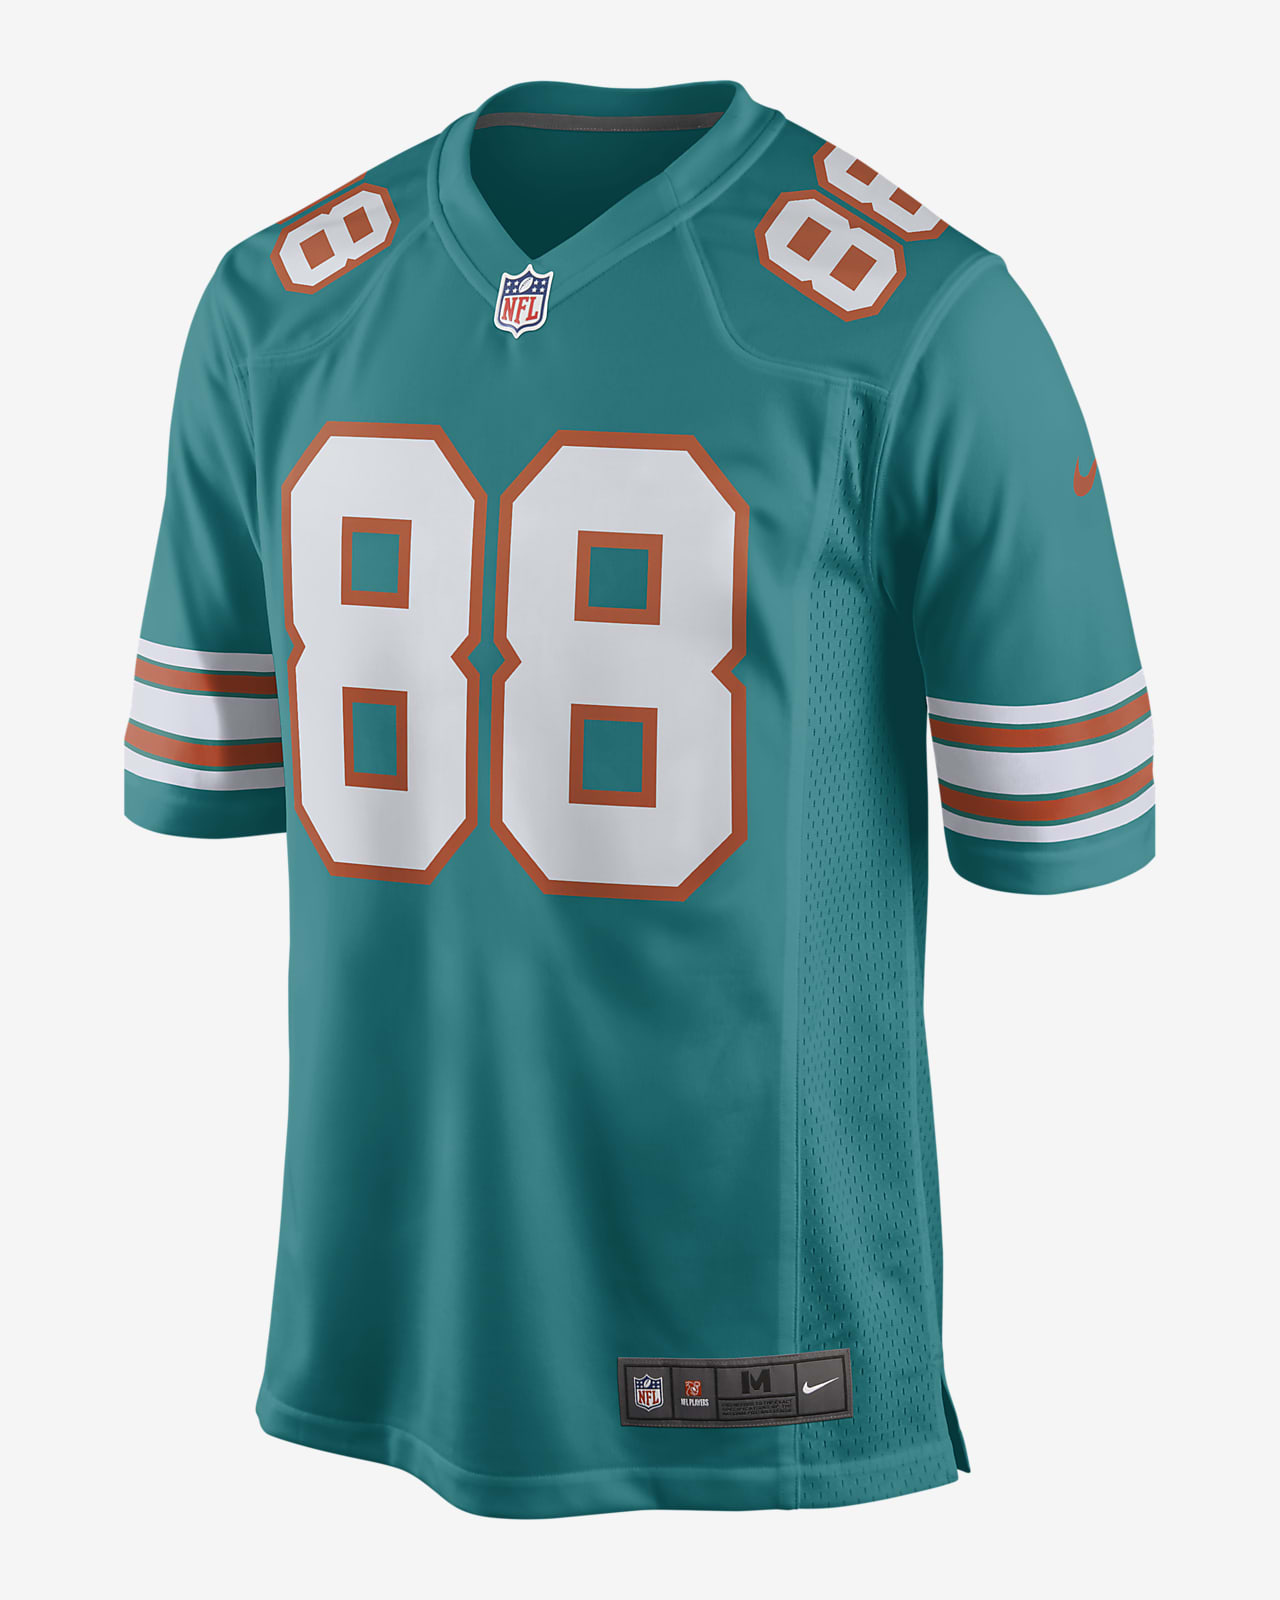 NFL Miami Dolphins (Mike Gesicki) Men's Game Football Jersey